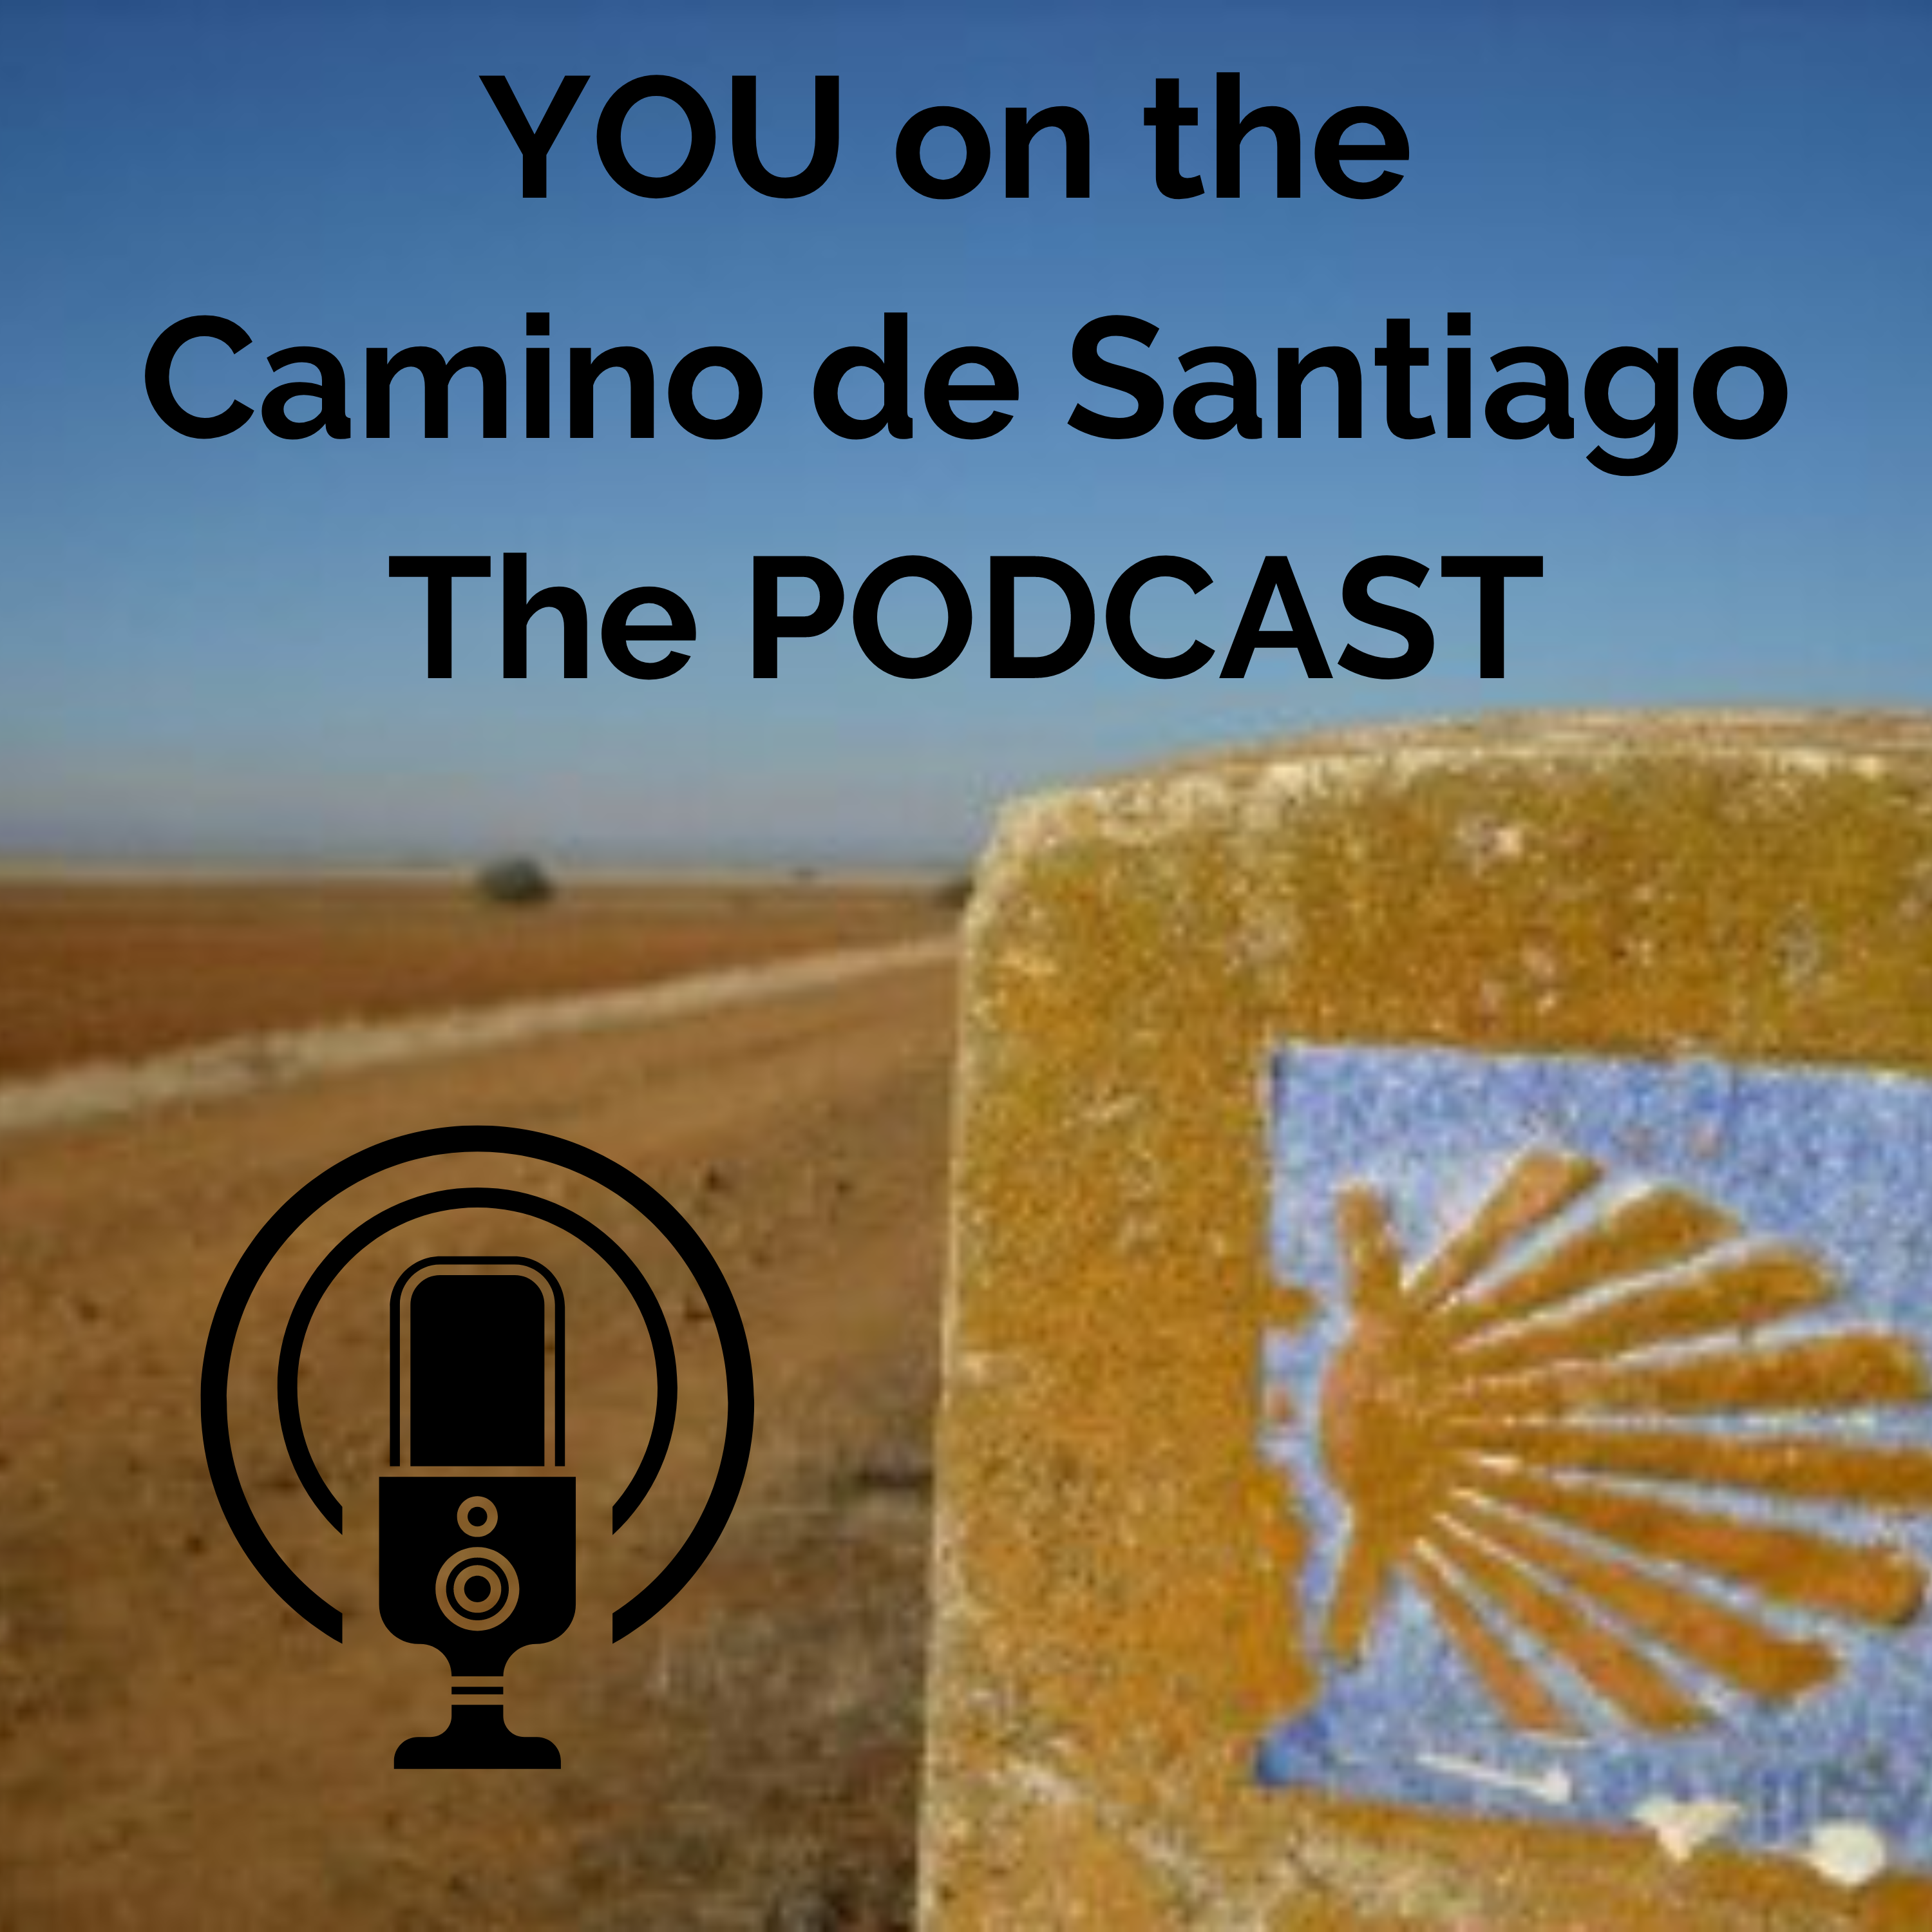 scallop shell image with All About the Camino de Santiago